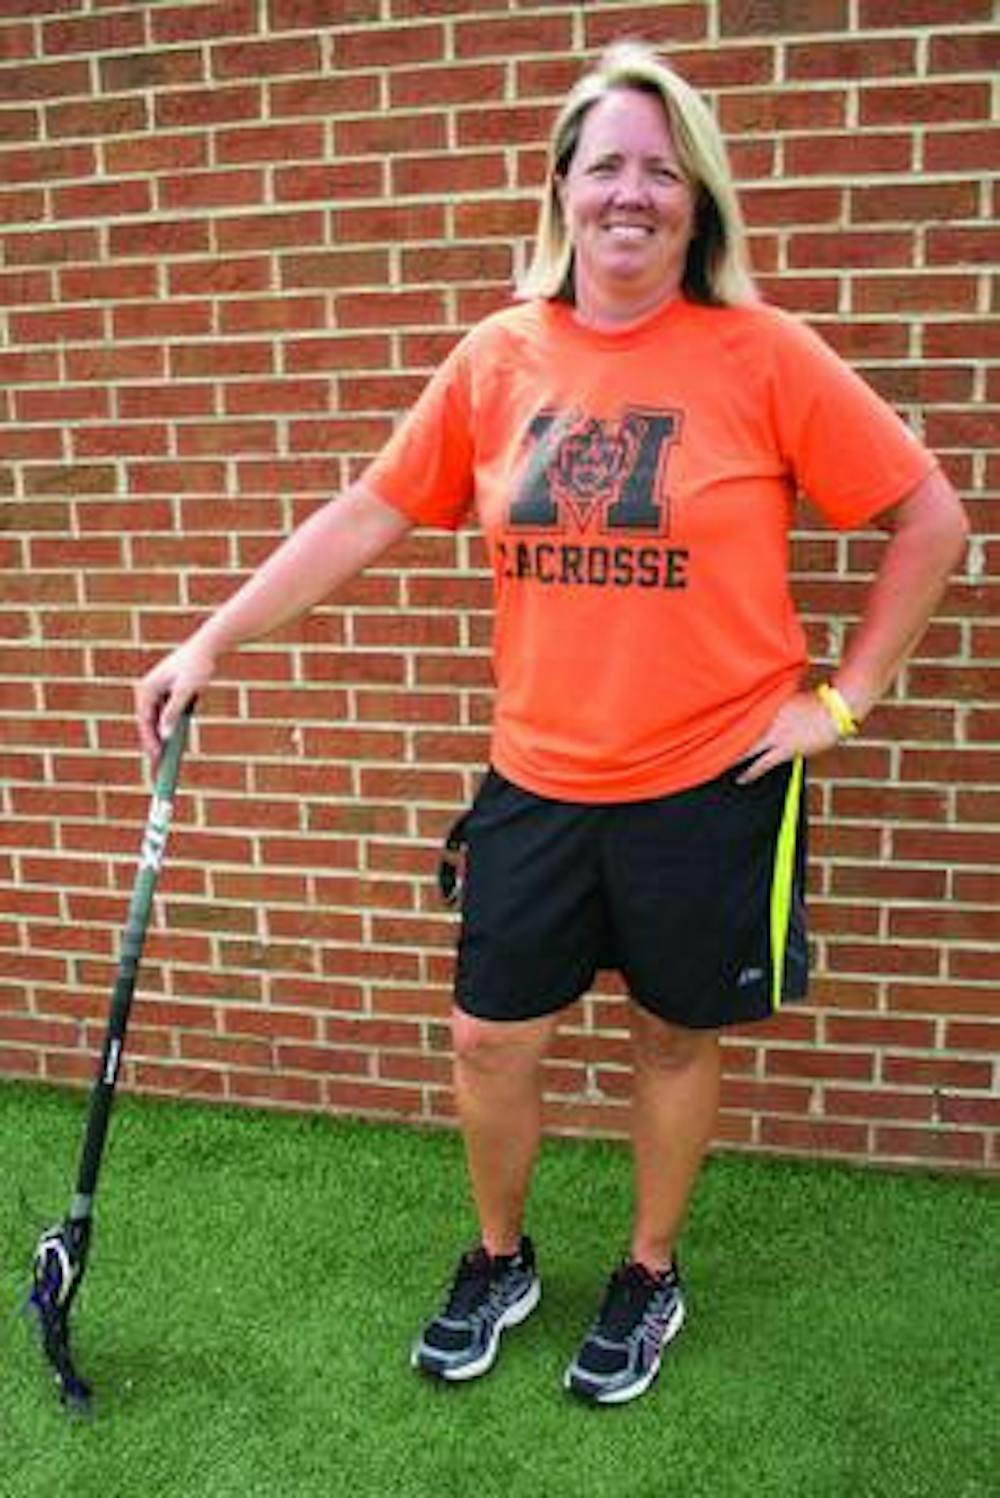 Samantha Eustace is the coach for Mercer’s women’s lacrosse team.